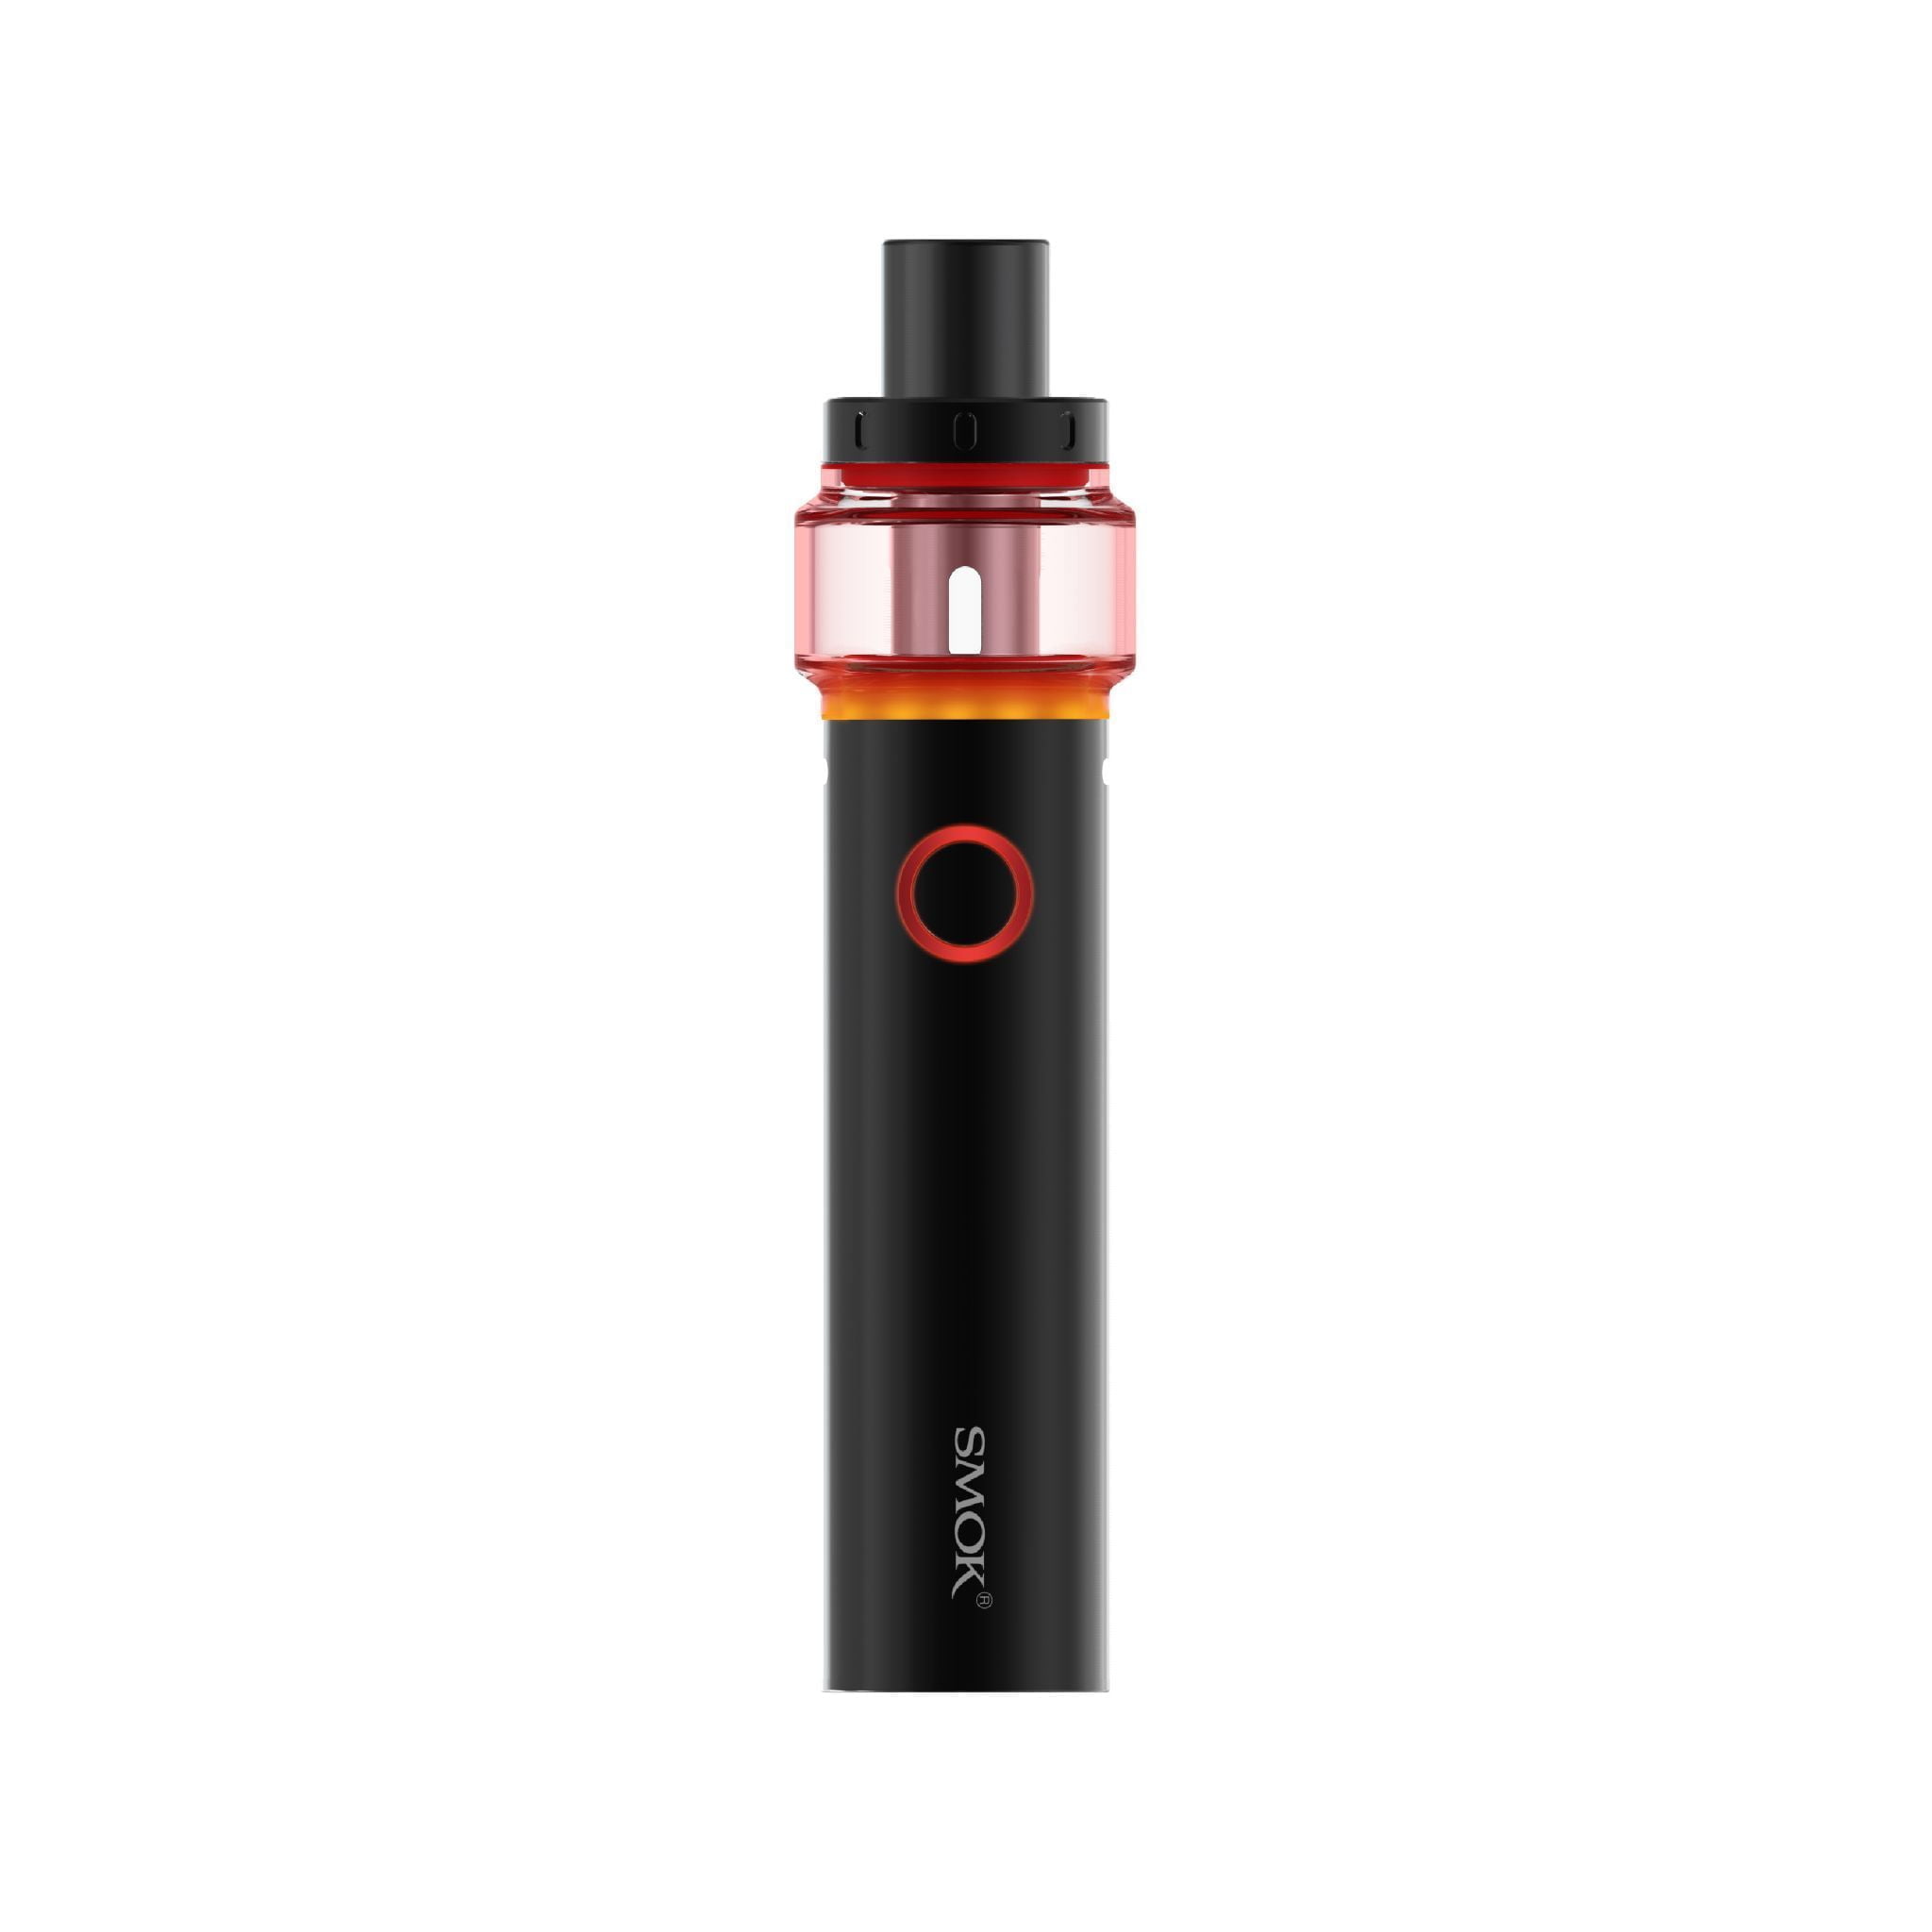 Whats The Latest in Vape Pen Tech? | Leafbuyer